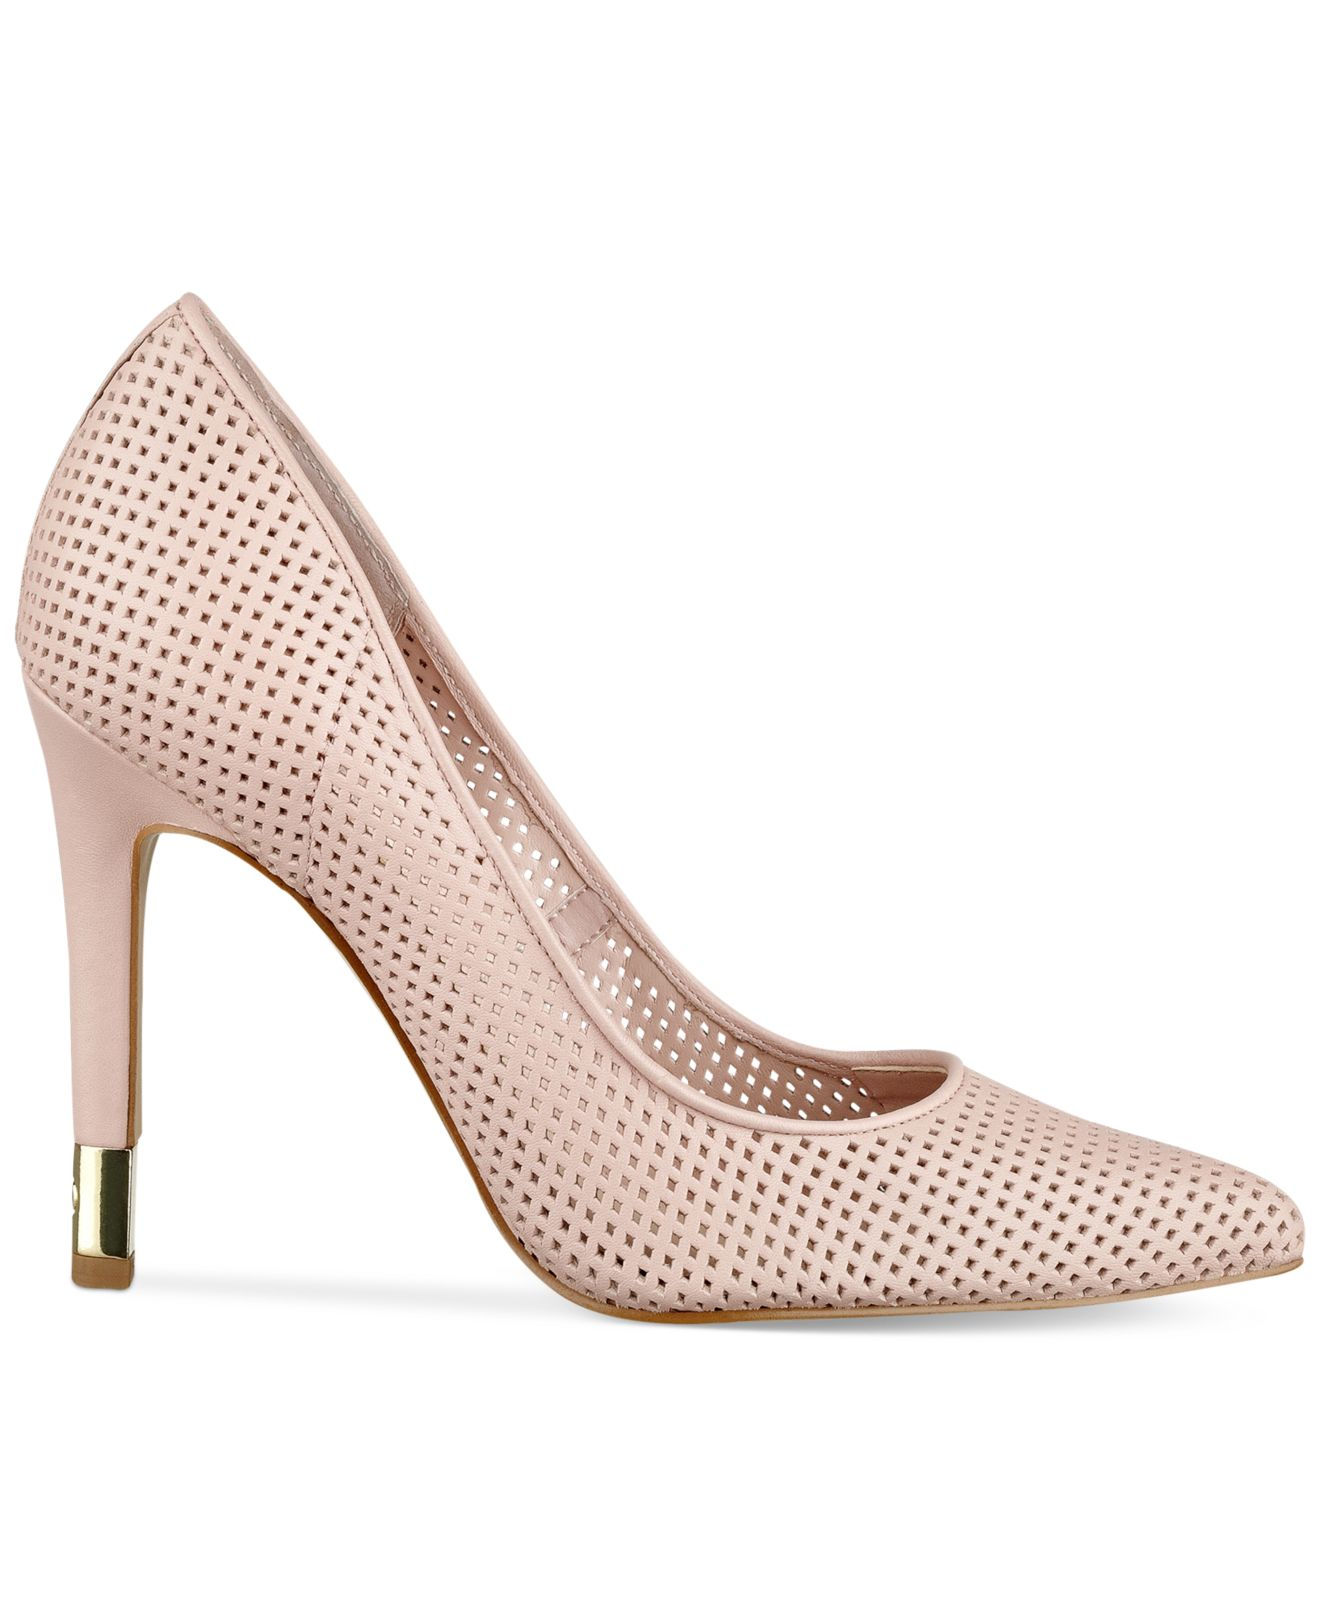 Guess Women'S Babbitt2 Pointy-Toe Pumps in Pink - Lyst